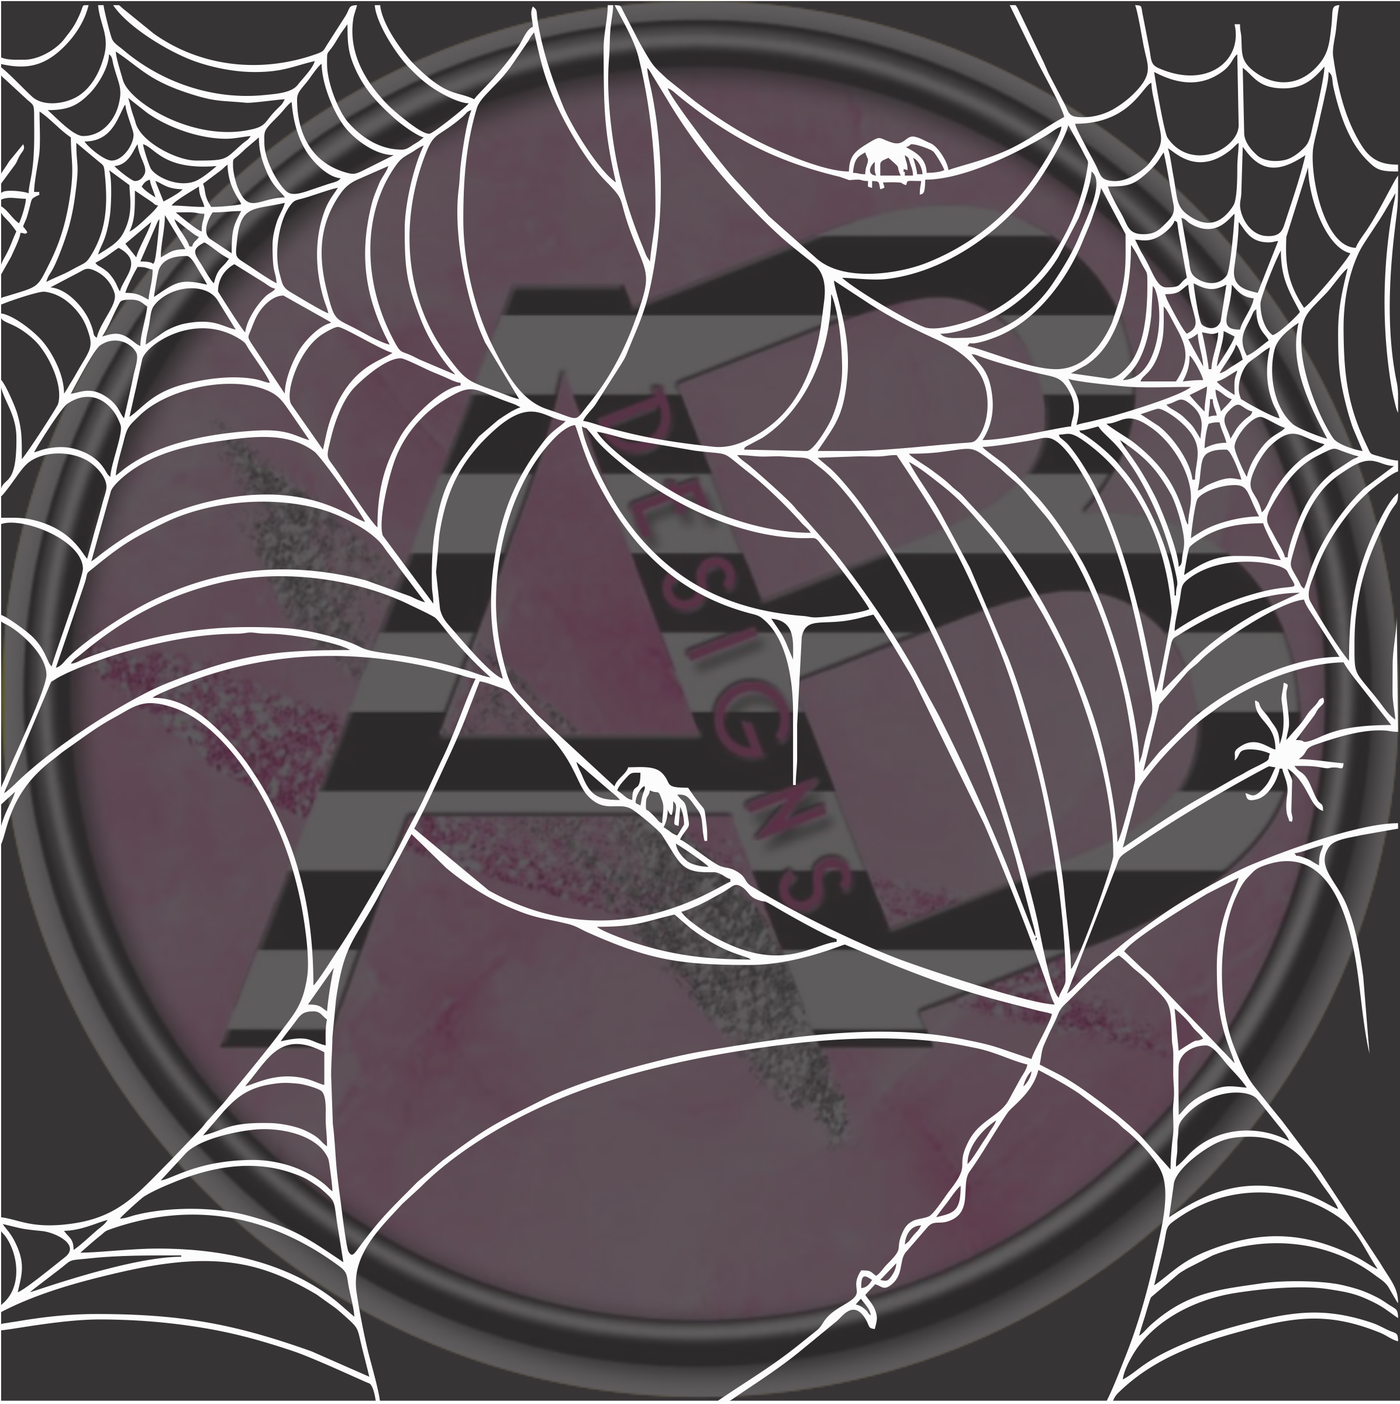 Adhesive Patterned Vinyl - White Ink Spider Web 07